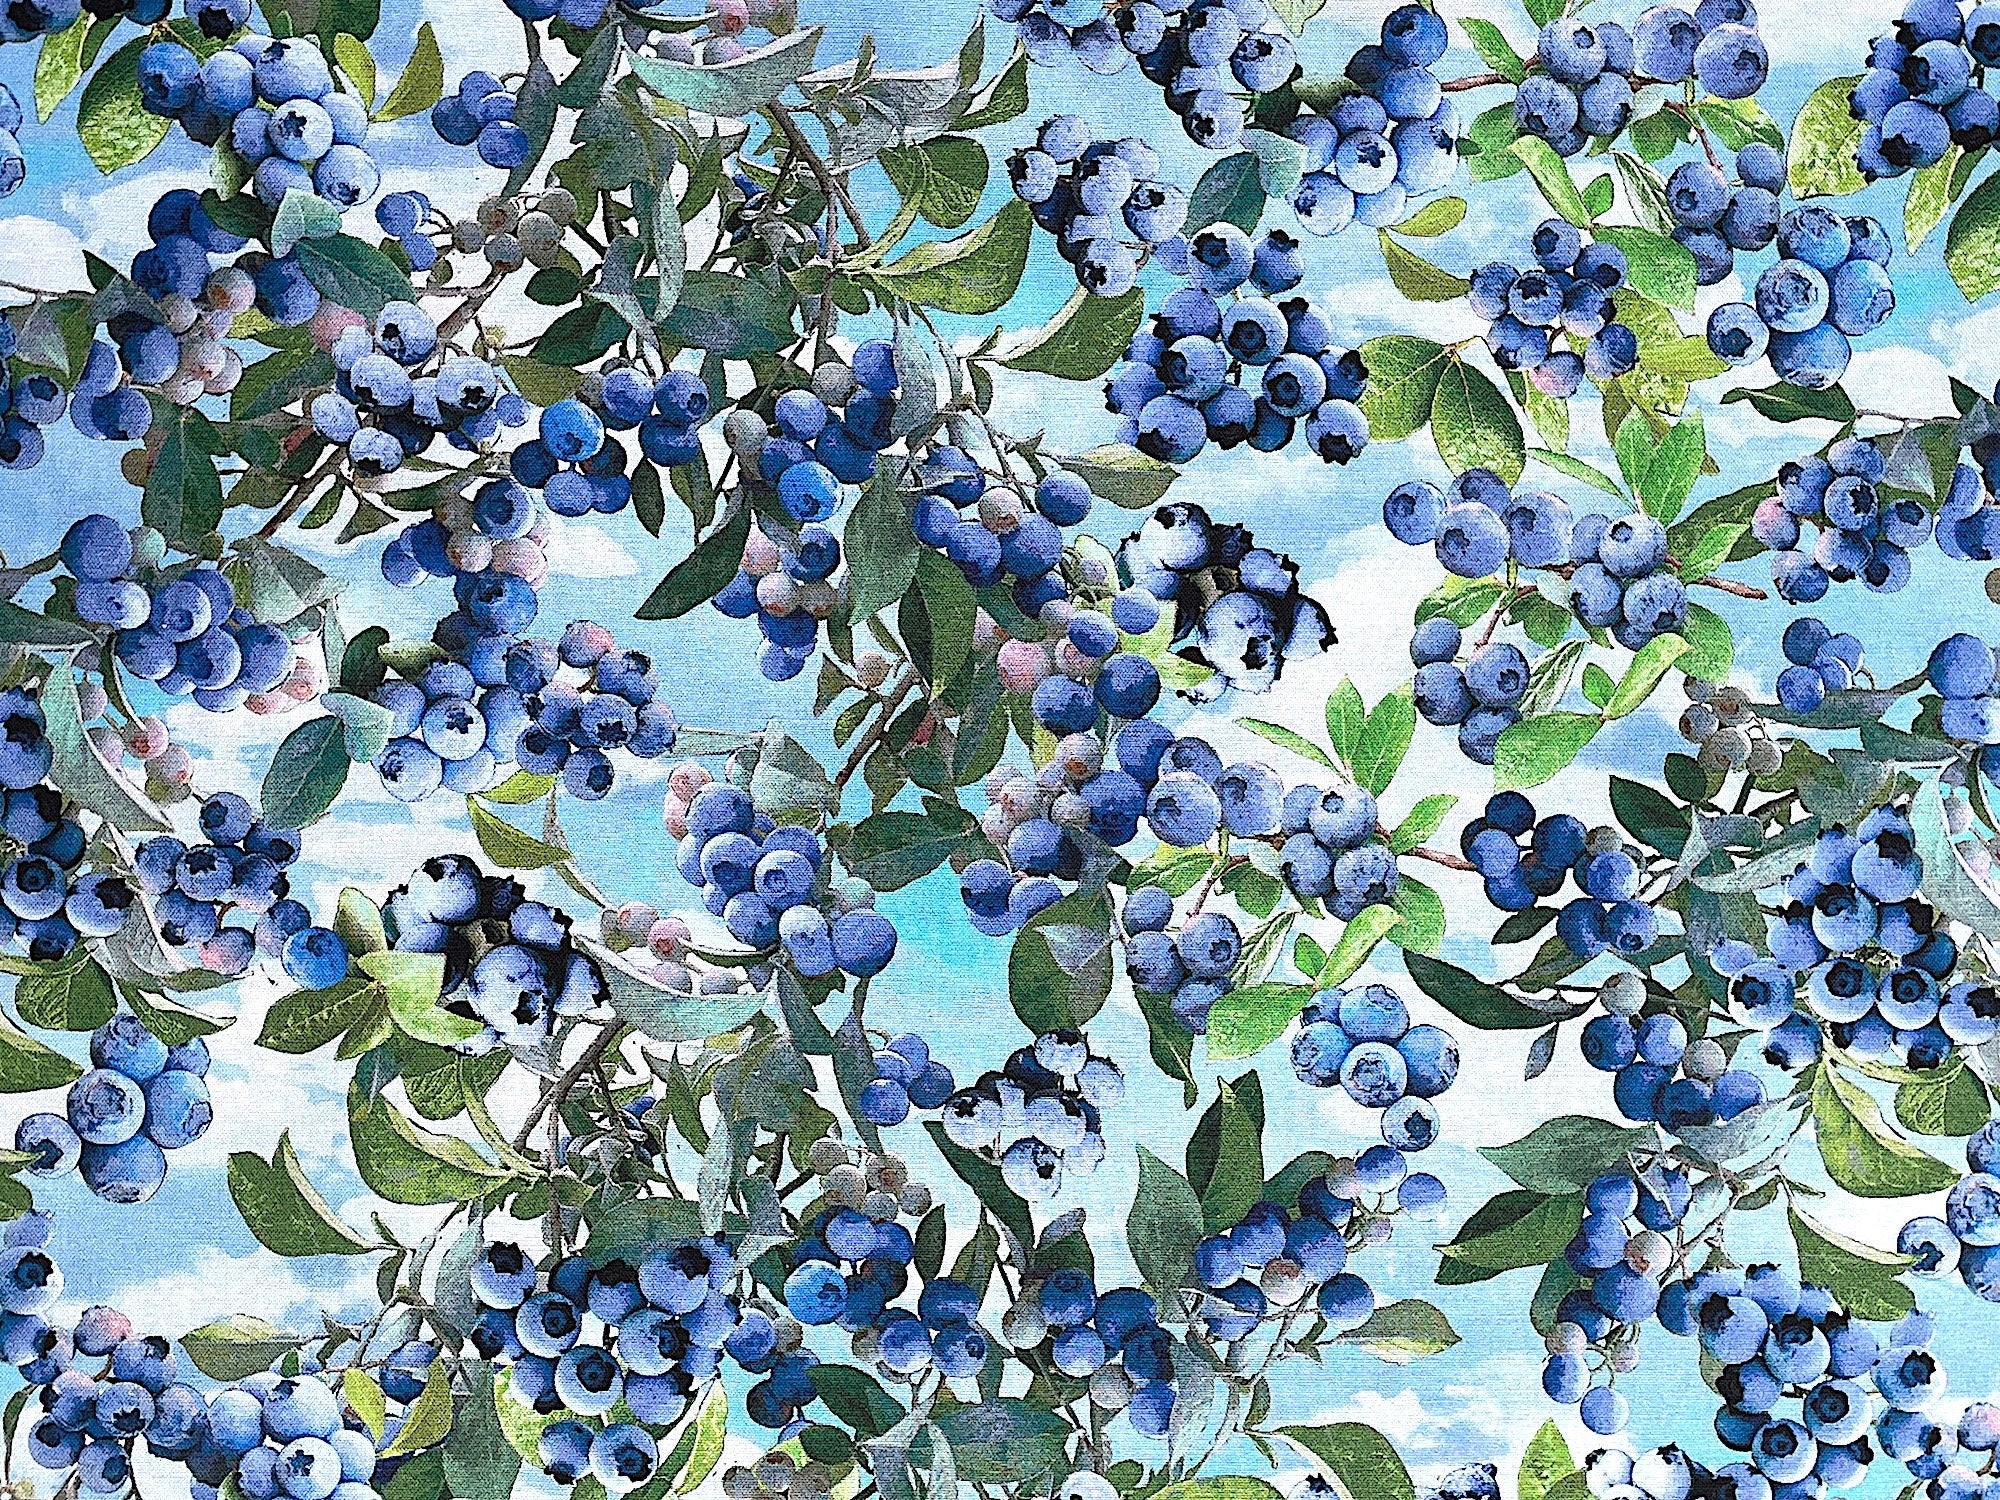 This light blue fabric is covered with blueberries. This fabric is part of the Blueberry Hill collection by Kanvas Studio